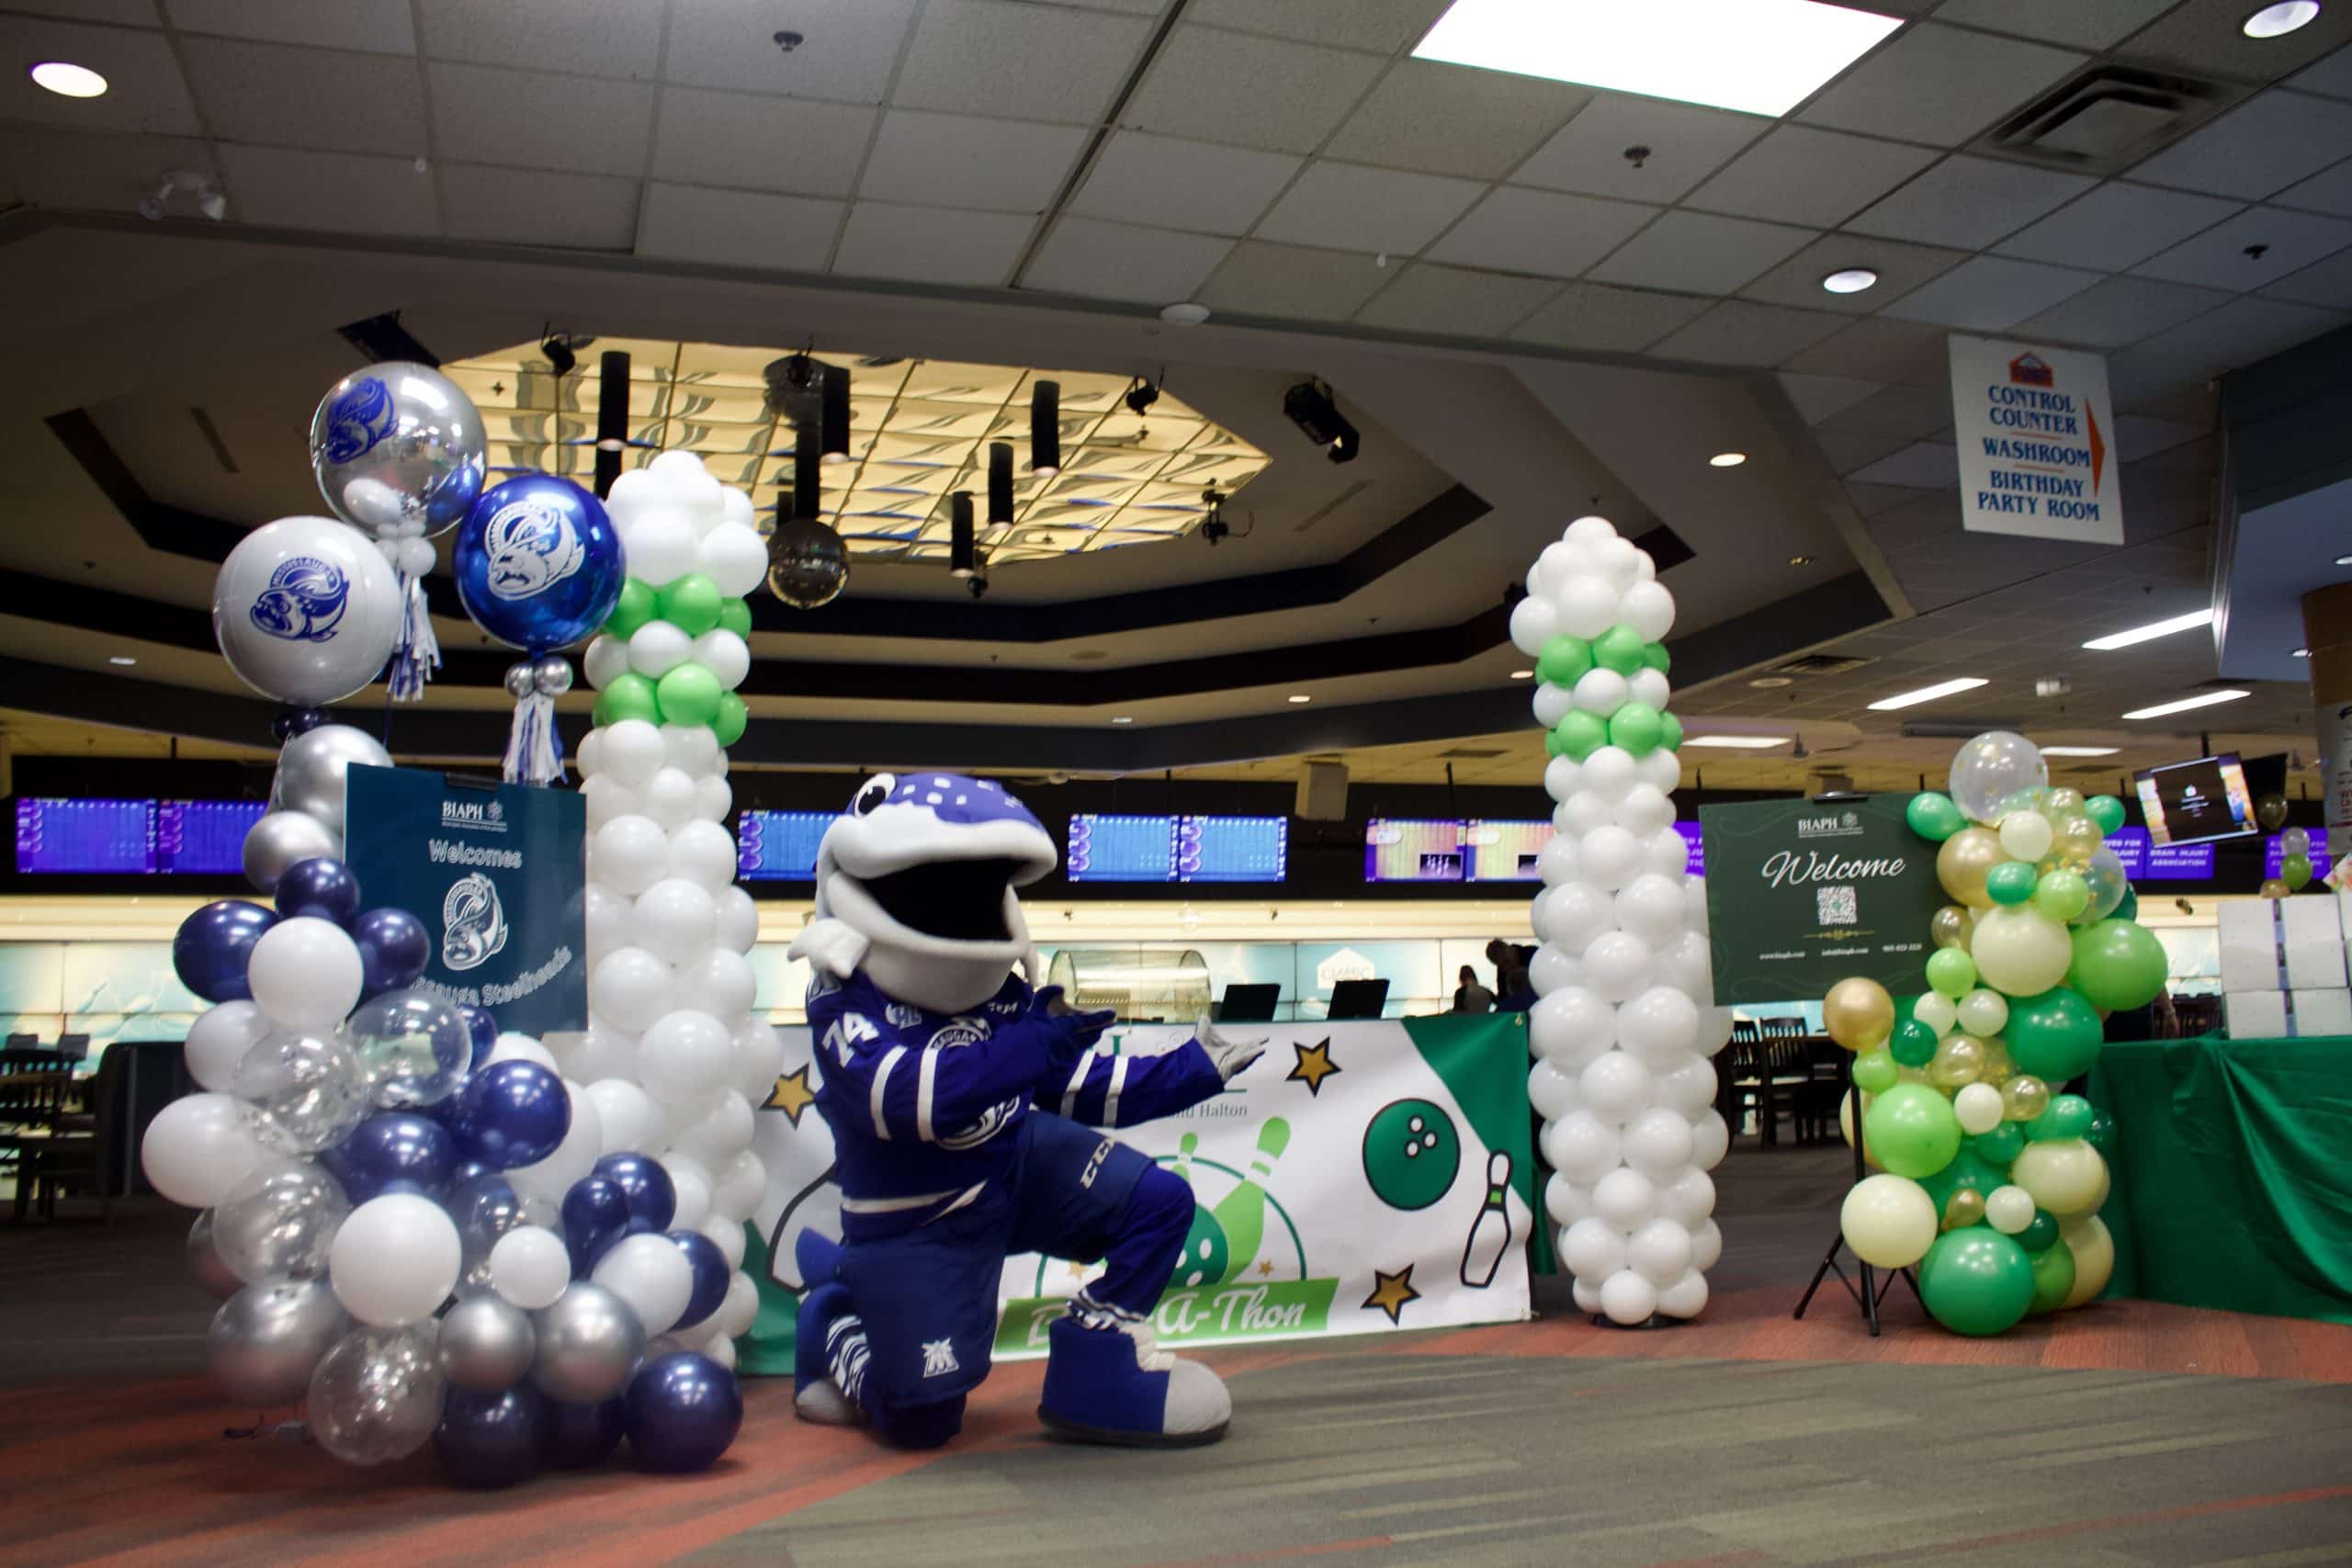 Balloon display for the 17th Annual Bowl-a-thon event. Bowl-a-thon banner in the middle, with two 7 foot balloon bowling pins on opposite side. Two welcome signs on the outer side of the pins. One green sign for BIAPH with green balloons around it, and one blue sign for the Mississauga Steelheads, with blue, white, and silver balloons around it.